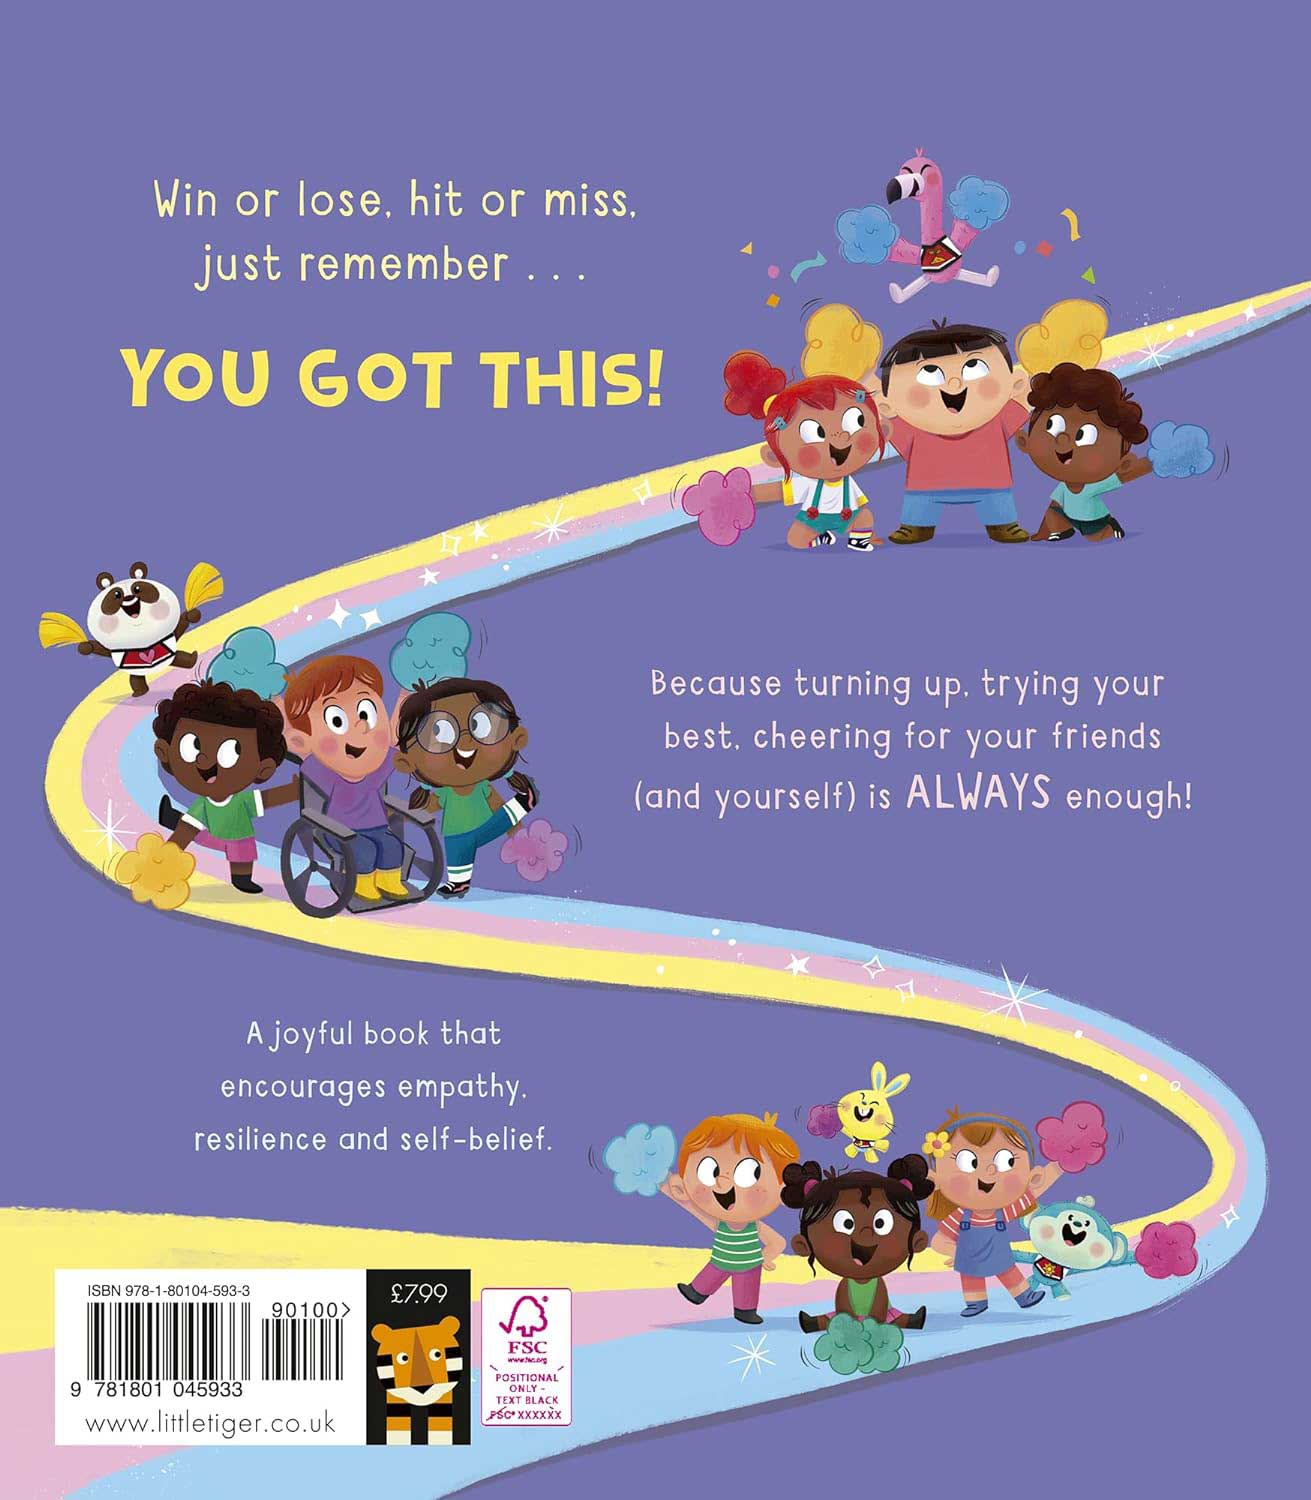 You Got This! by Rachael Davis, illustrated by Leire Martín spread 1